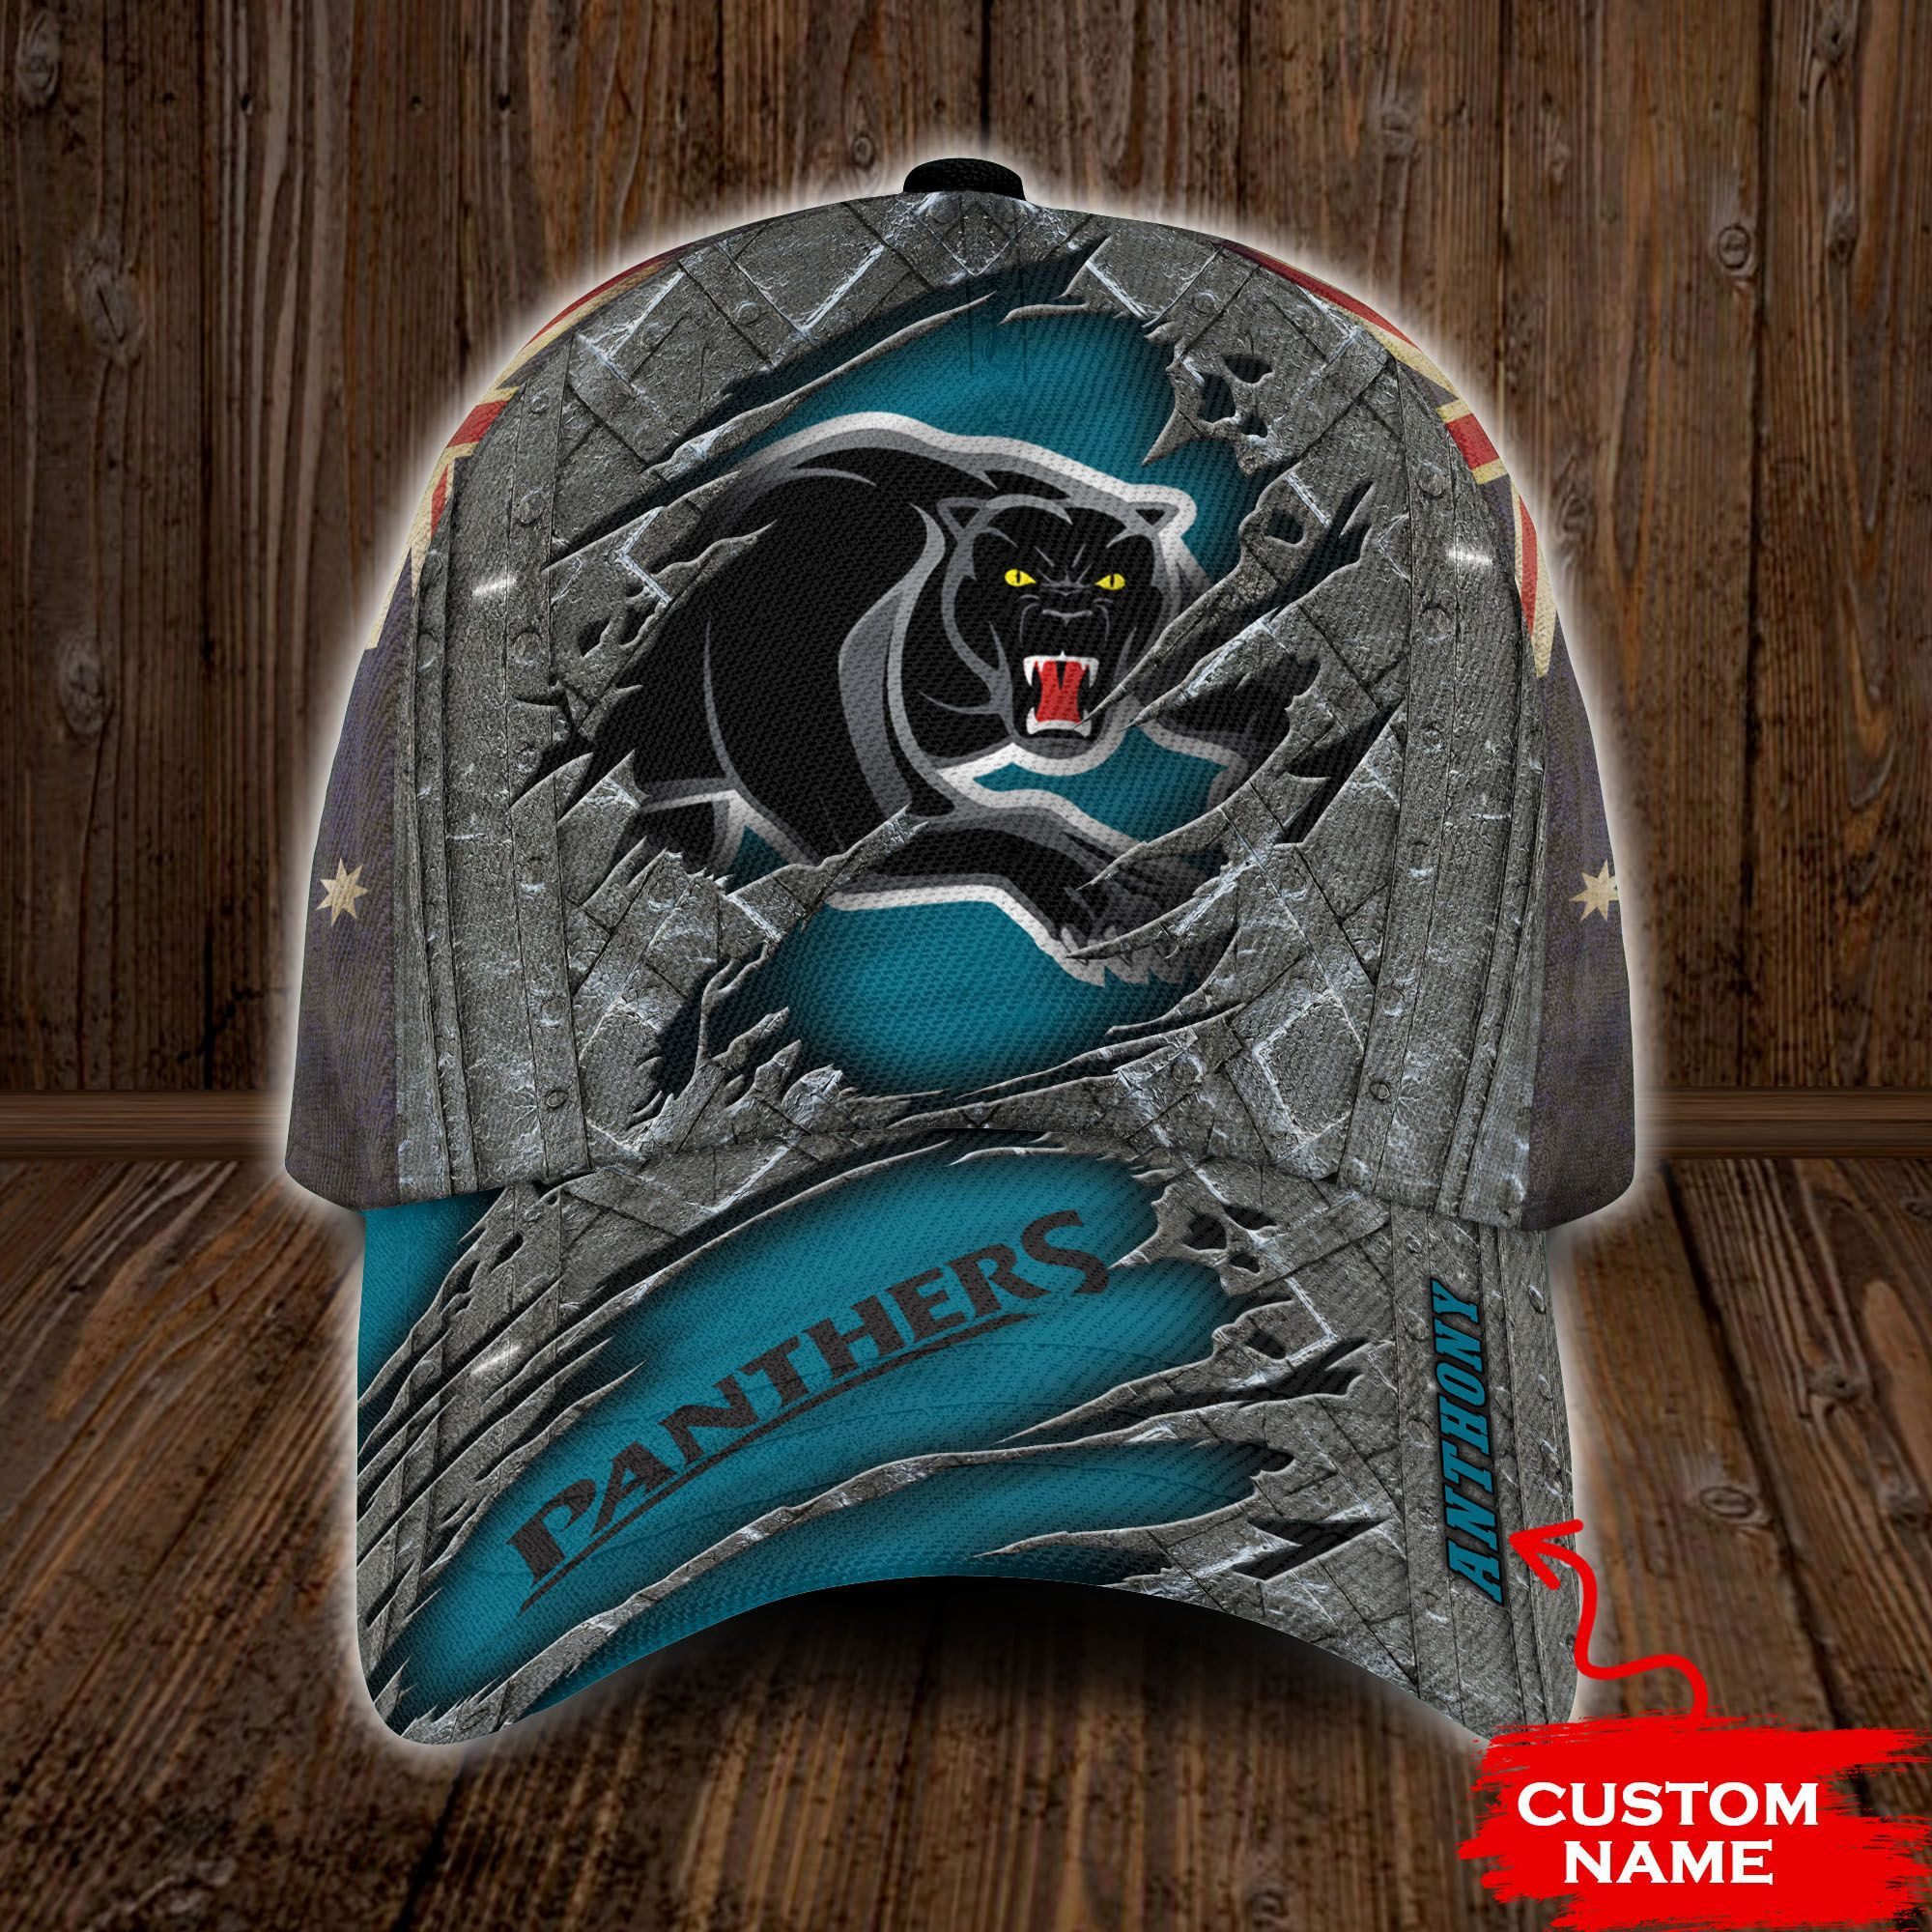 Penrith Panthers NRL Classic Hat Caps Gift For Men